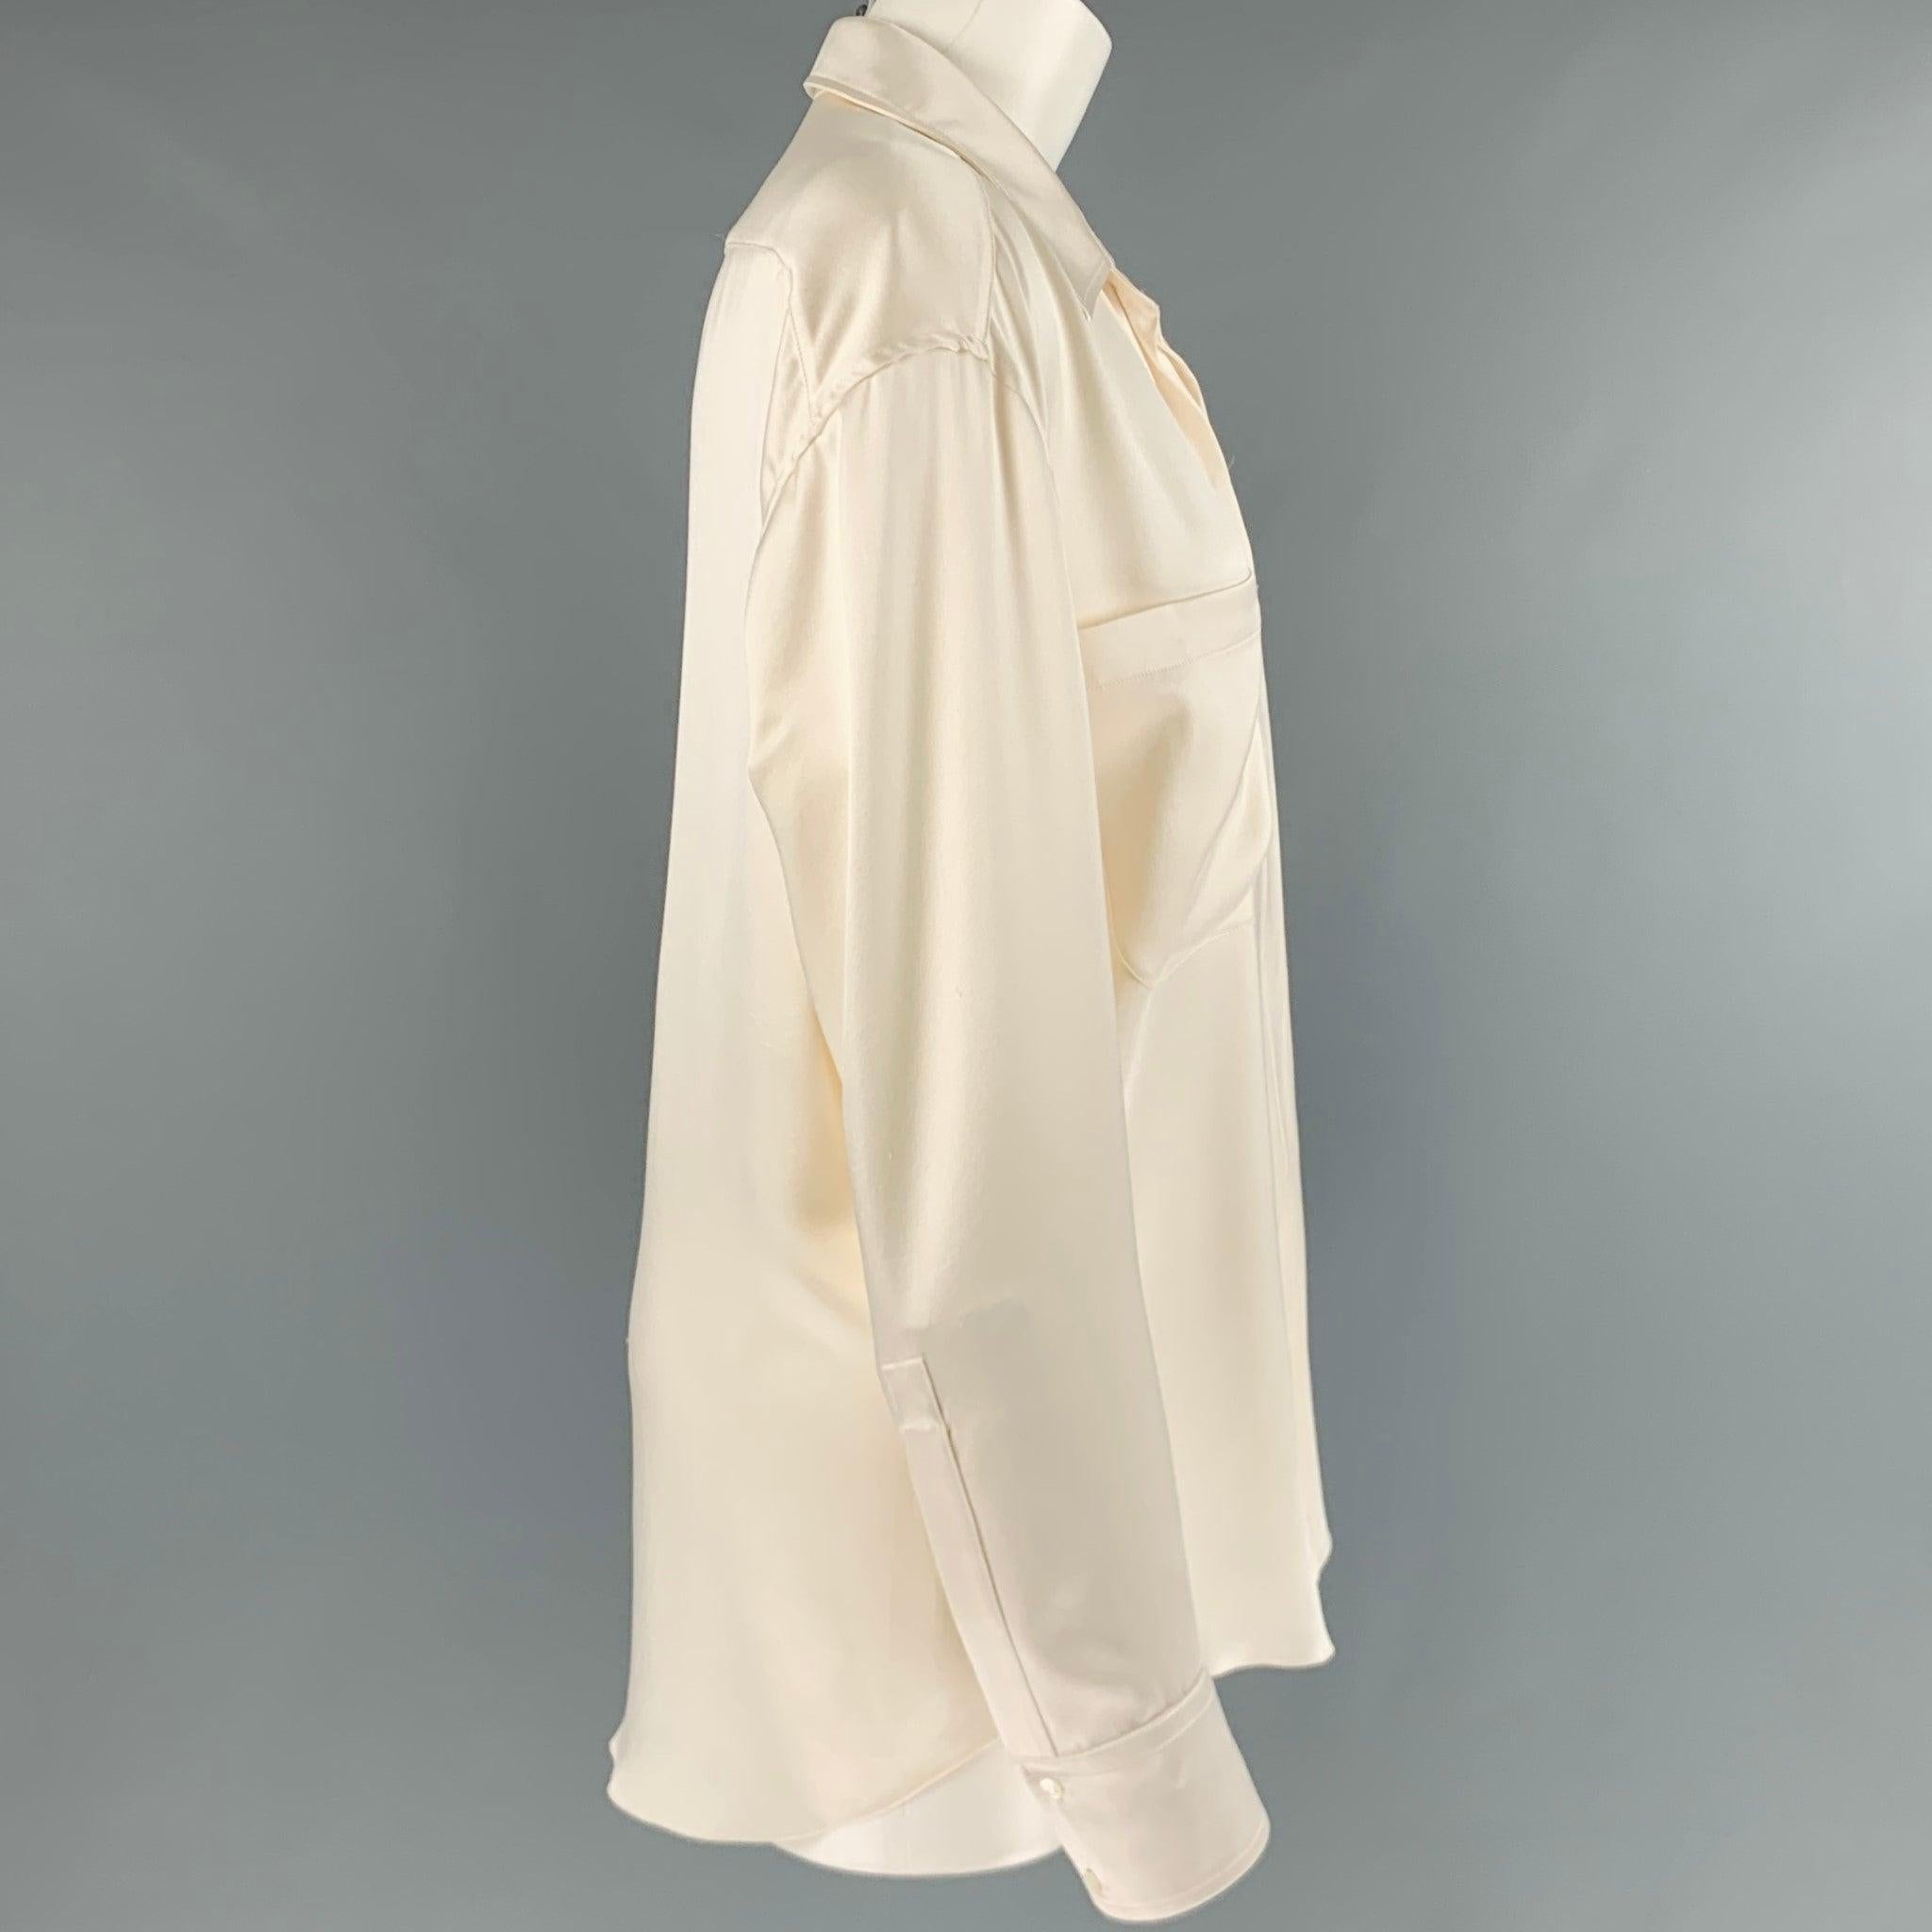 BALMAIN dress top
in a cream silk fabric featuring two large pockets, spread collar, and hidden button closure. Made in France.Good Pre-Owned Condition. Moderate signs of wear. As is, please check photos. 

Marked:   40 

Measurements: 
 
Shoulder: